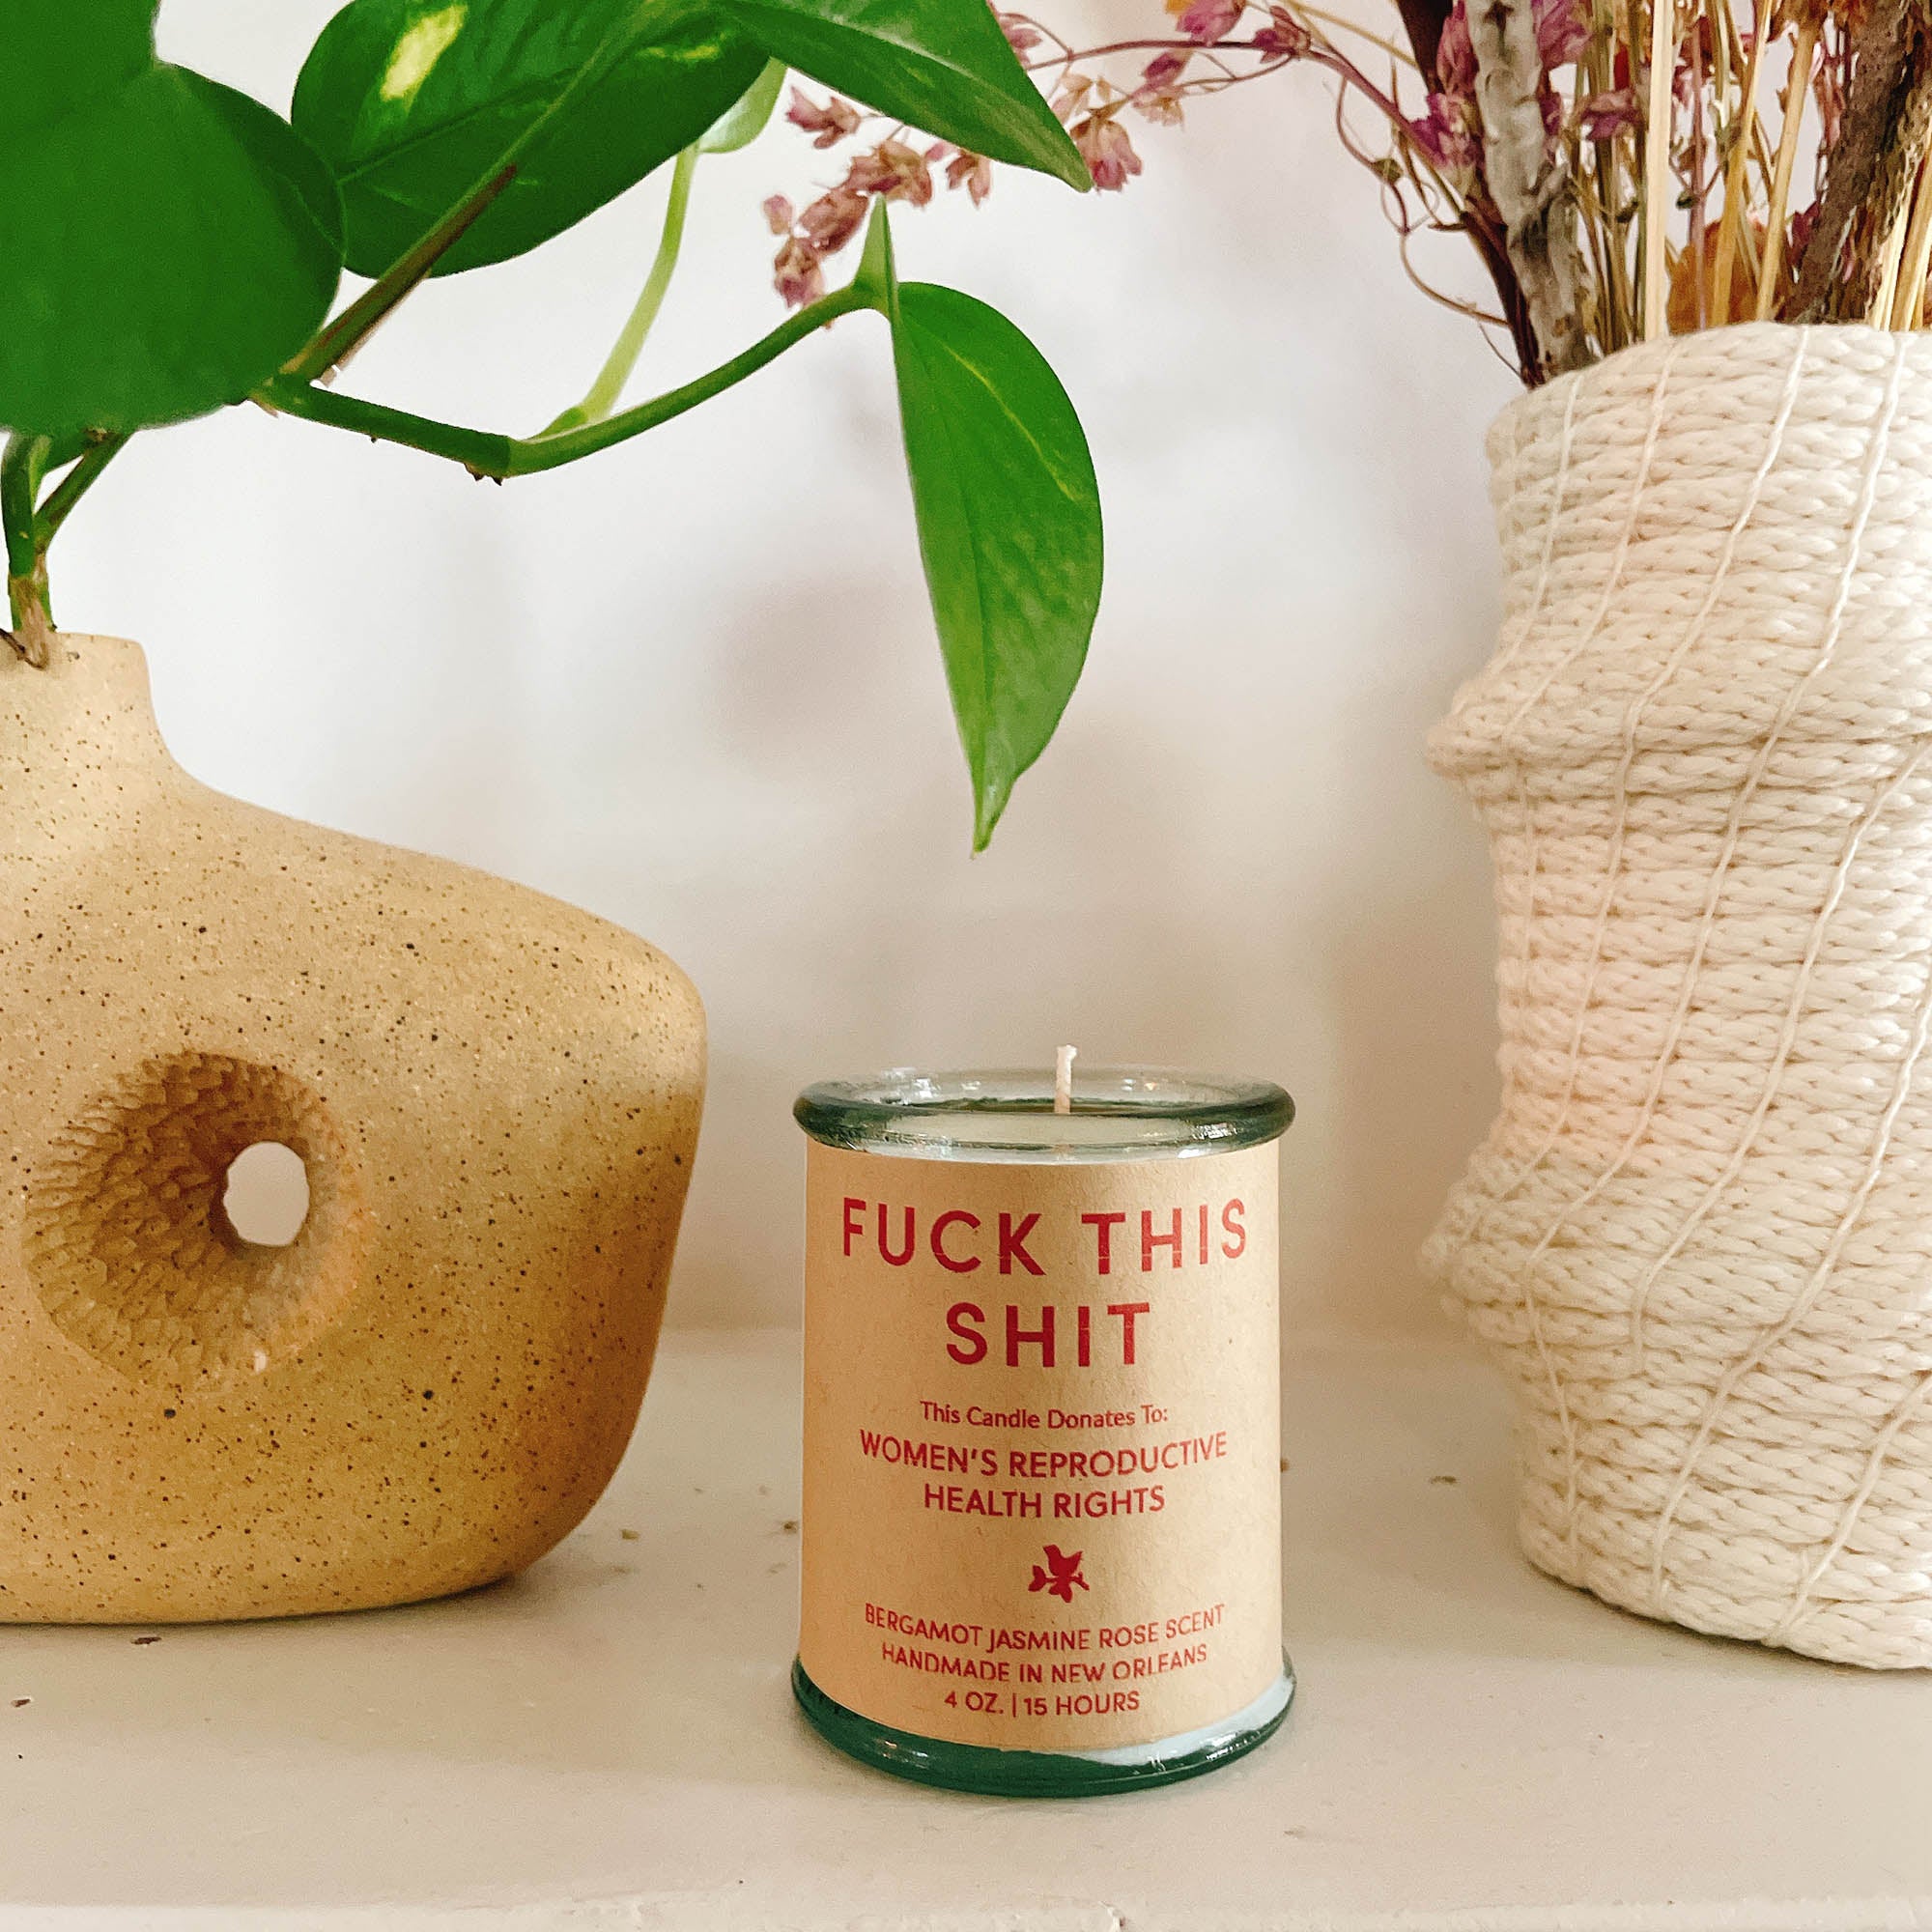 Fuck this Shit Candle - Gives to Women's Reproductive Rights, Bergamot Jasmine Rose Scent